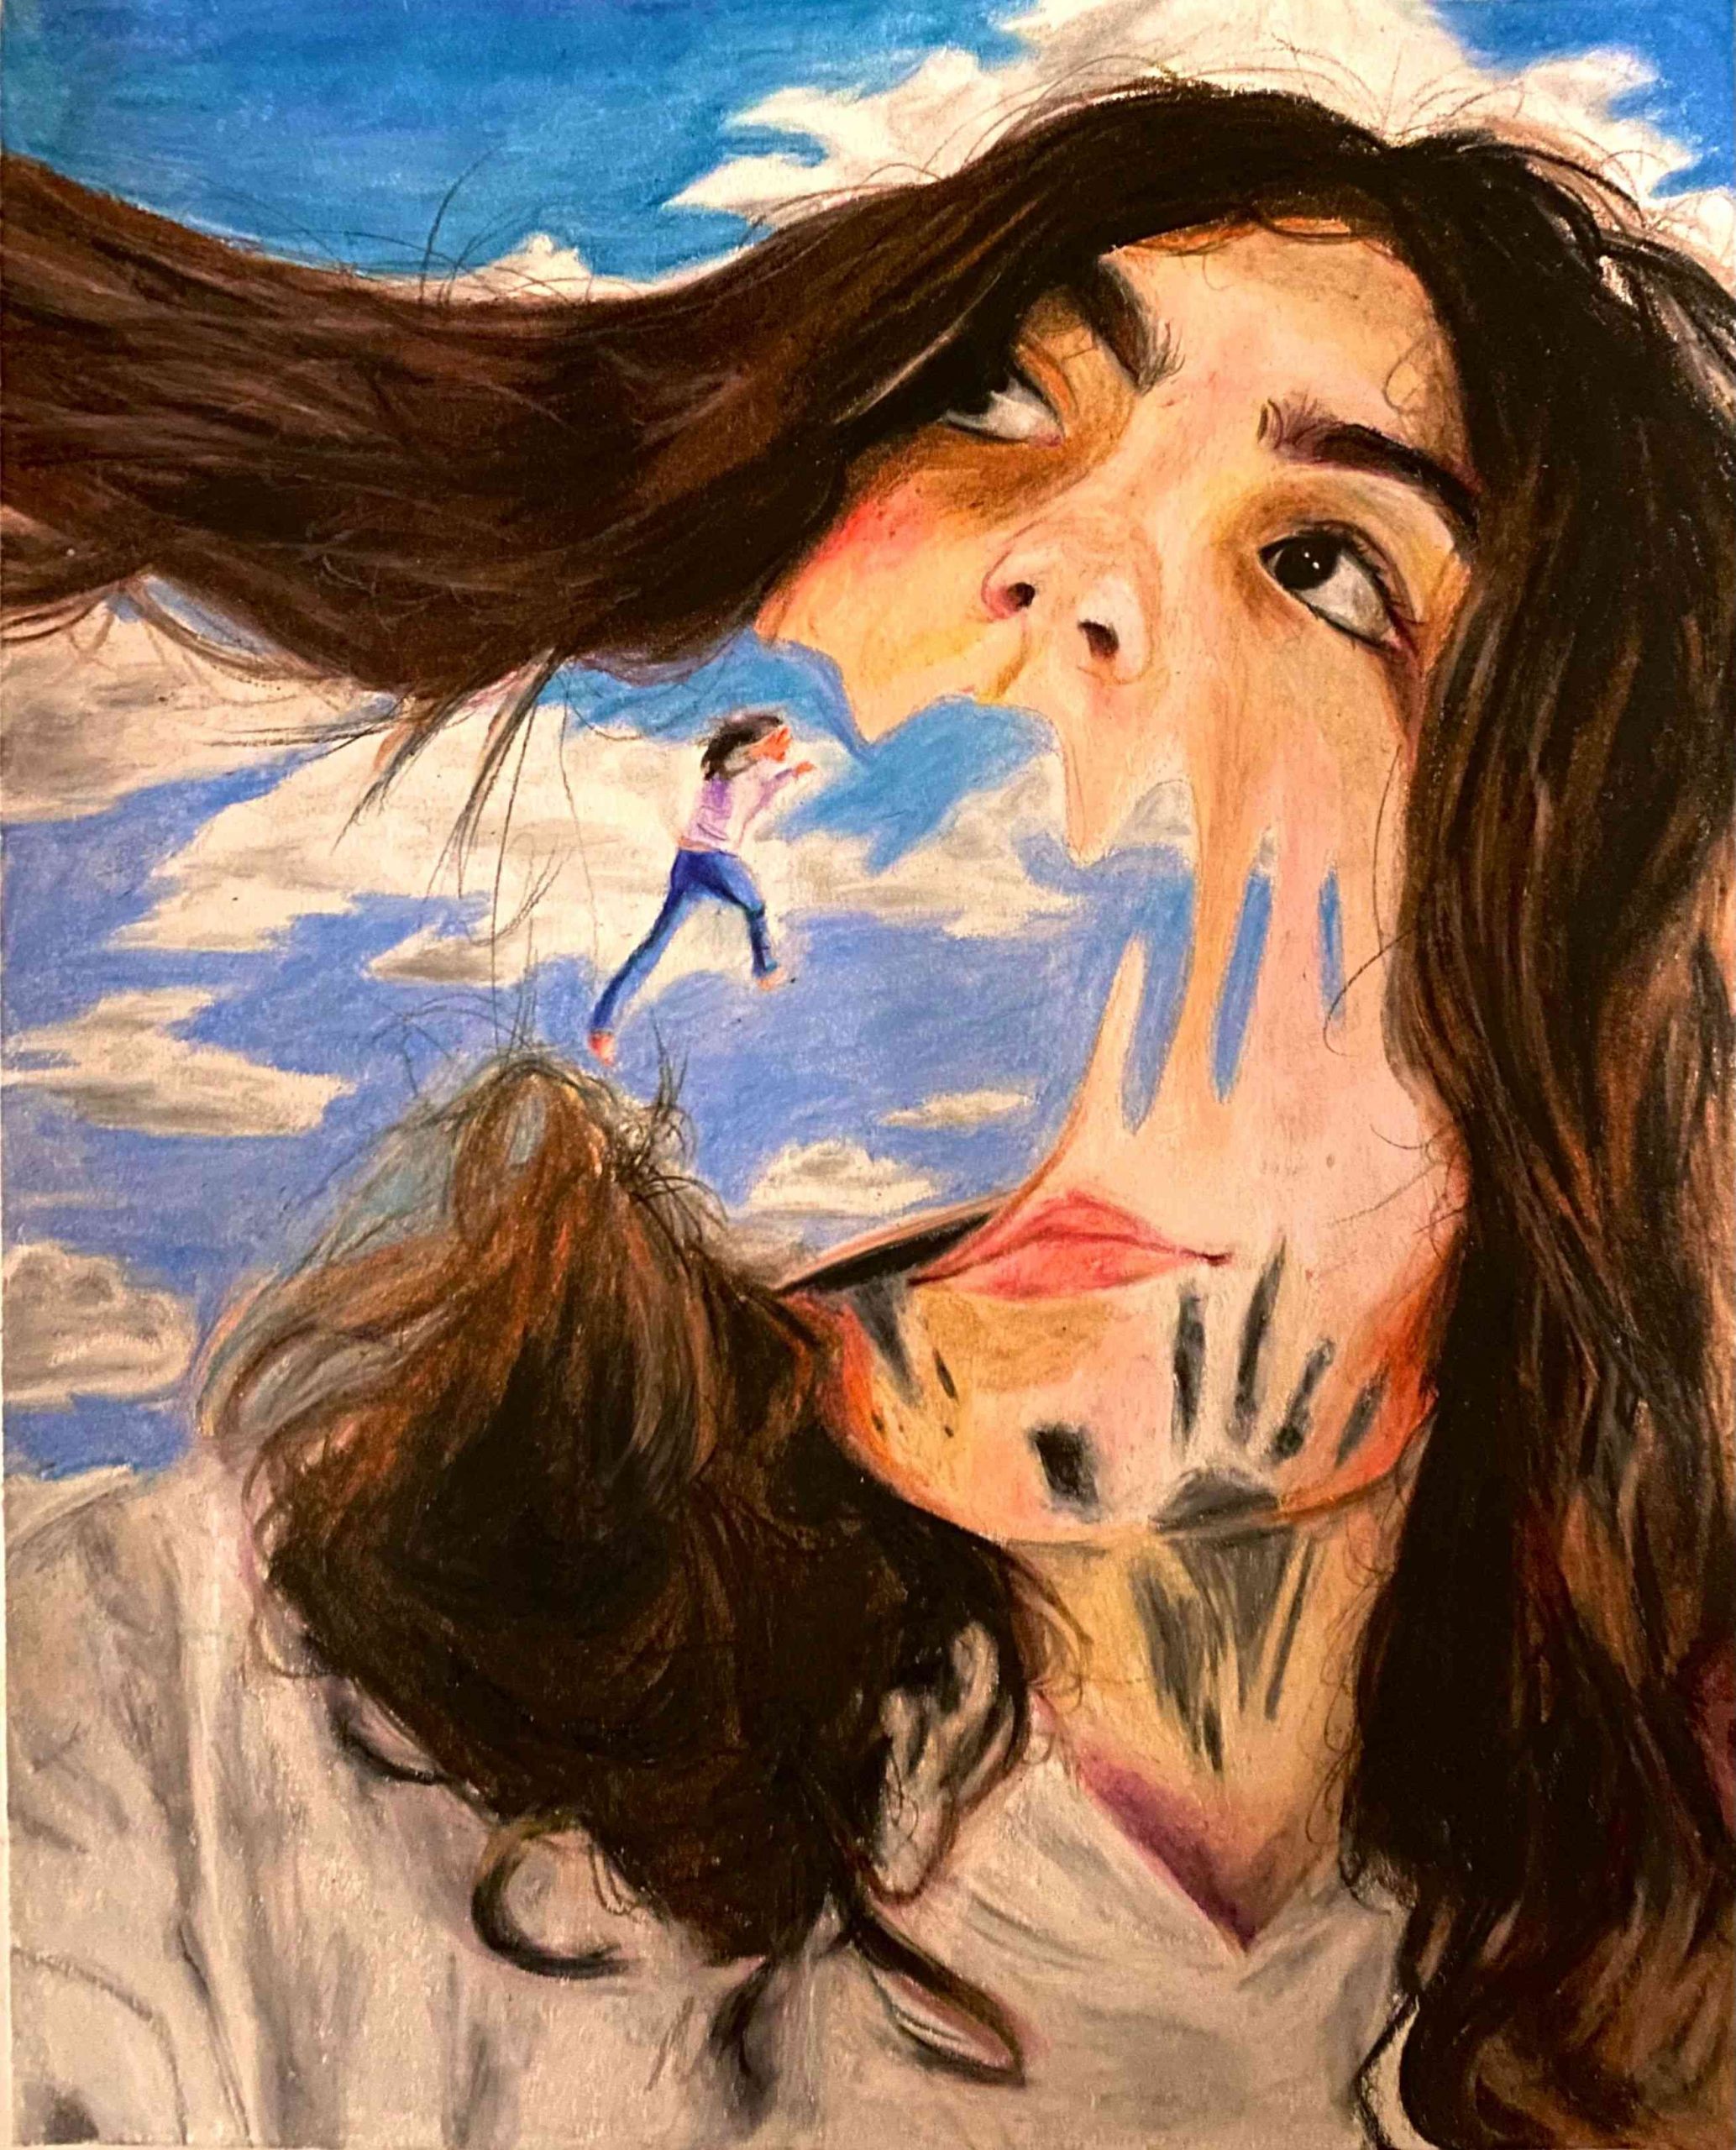 A surreal painting of a woman where there is an ocean in her mouth